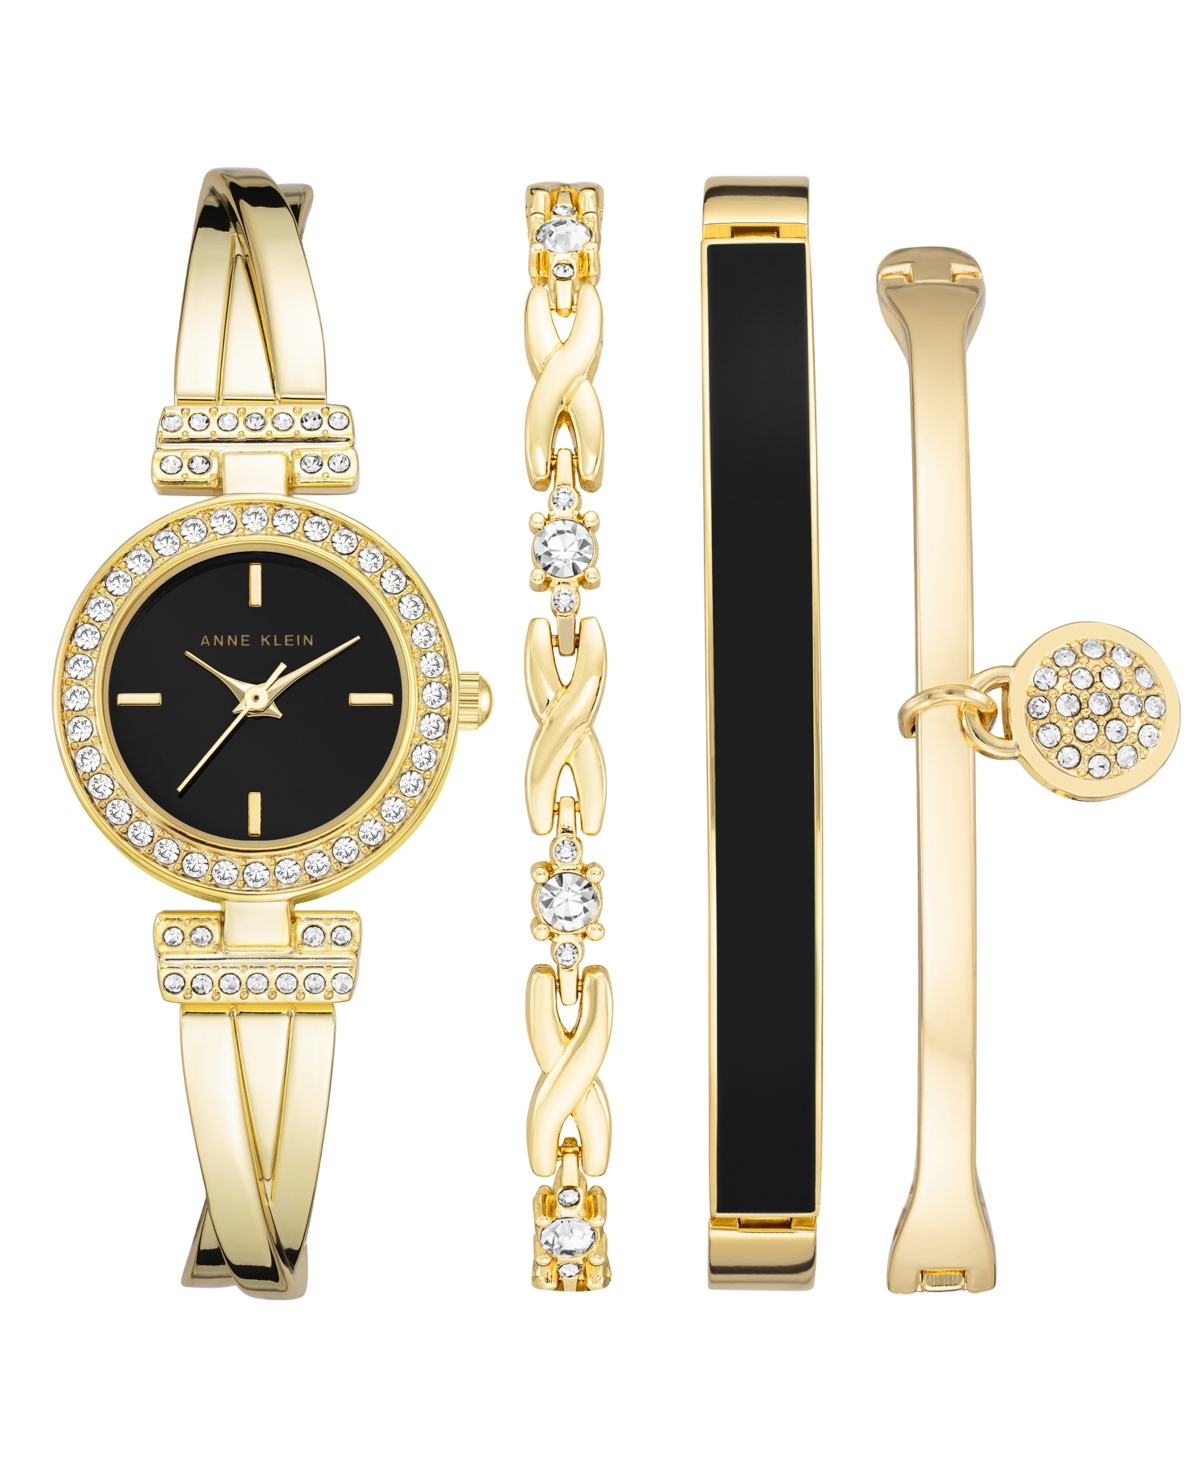 Anne Klein Women's Gold-tone Alloy Bangle With Crystal Accents Fashion Watch 37mm Set 4 Pieces